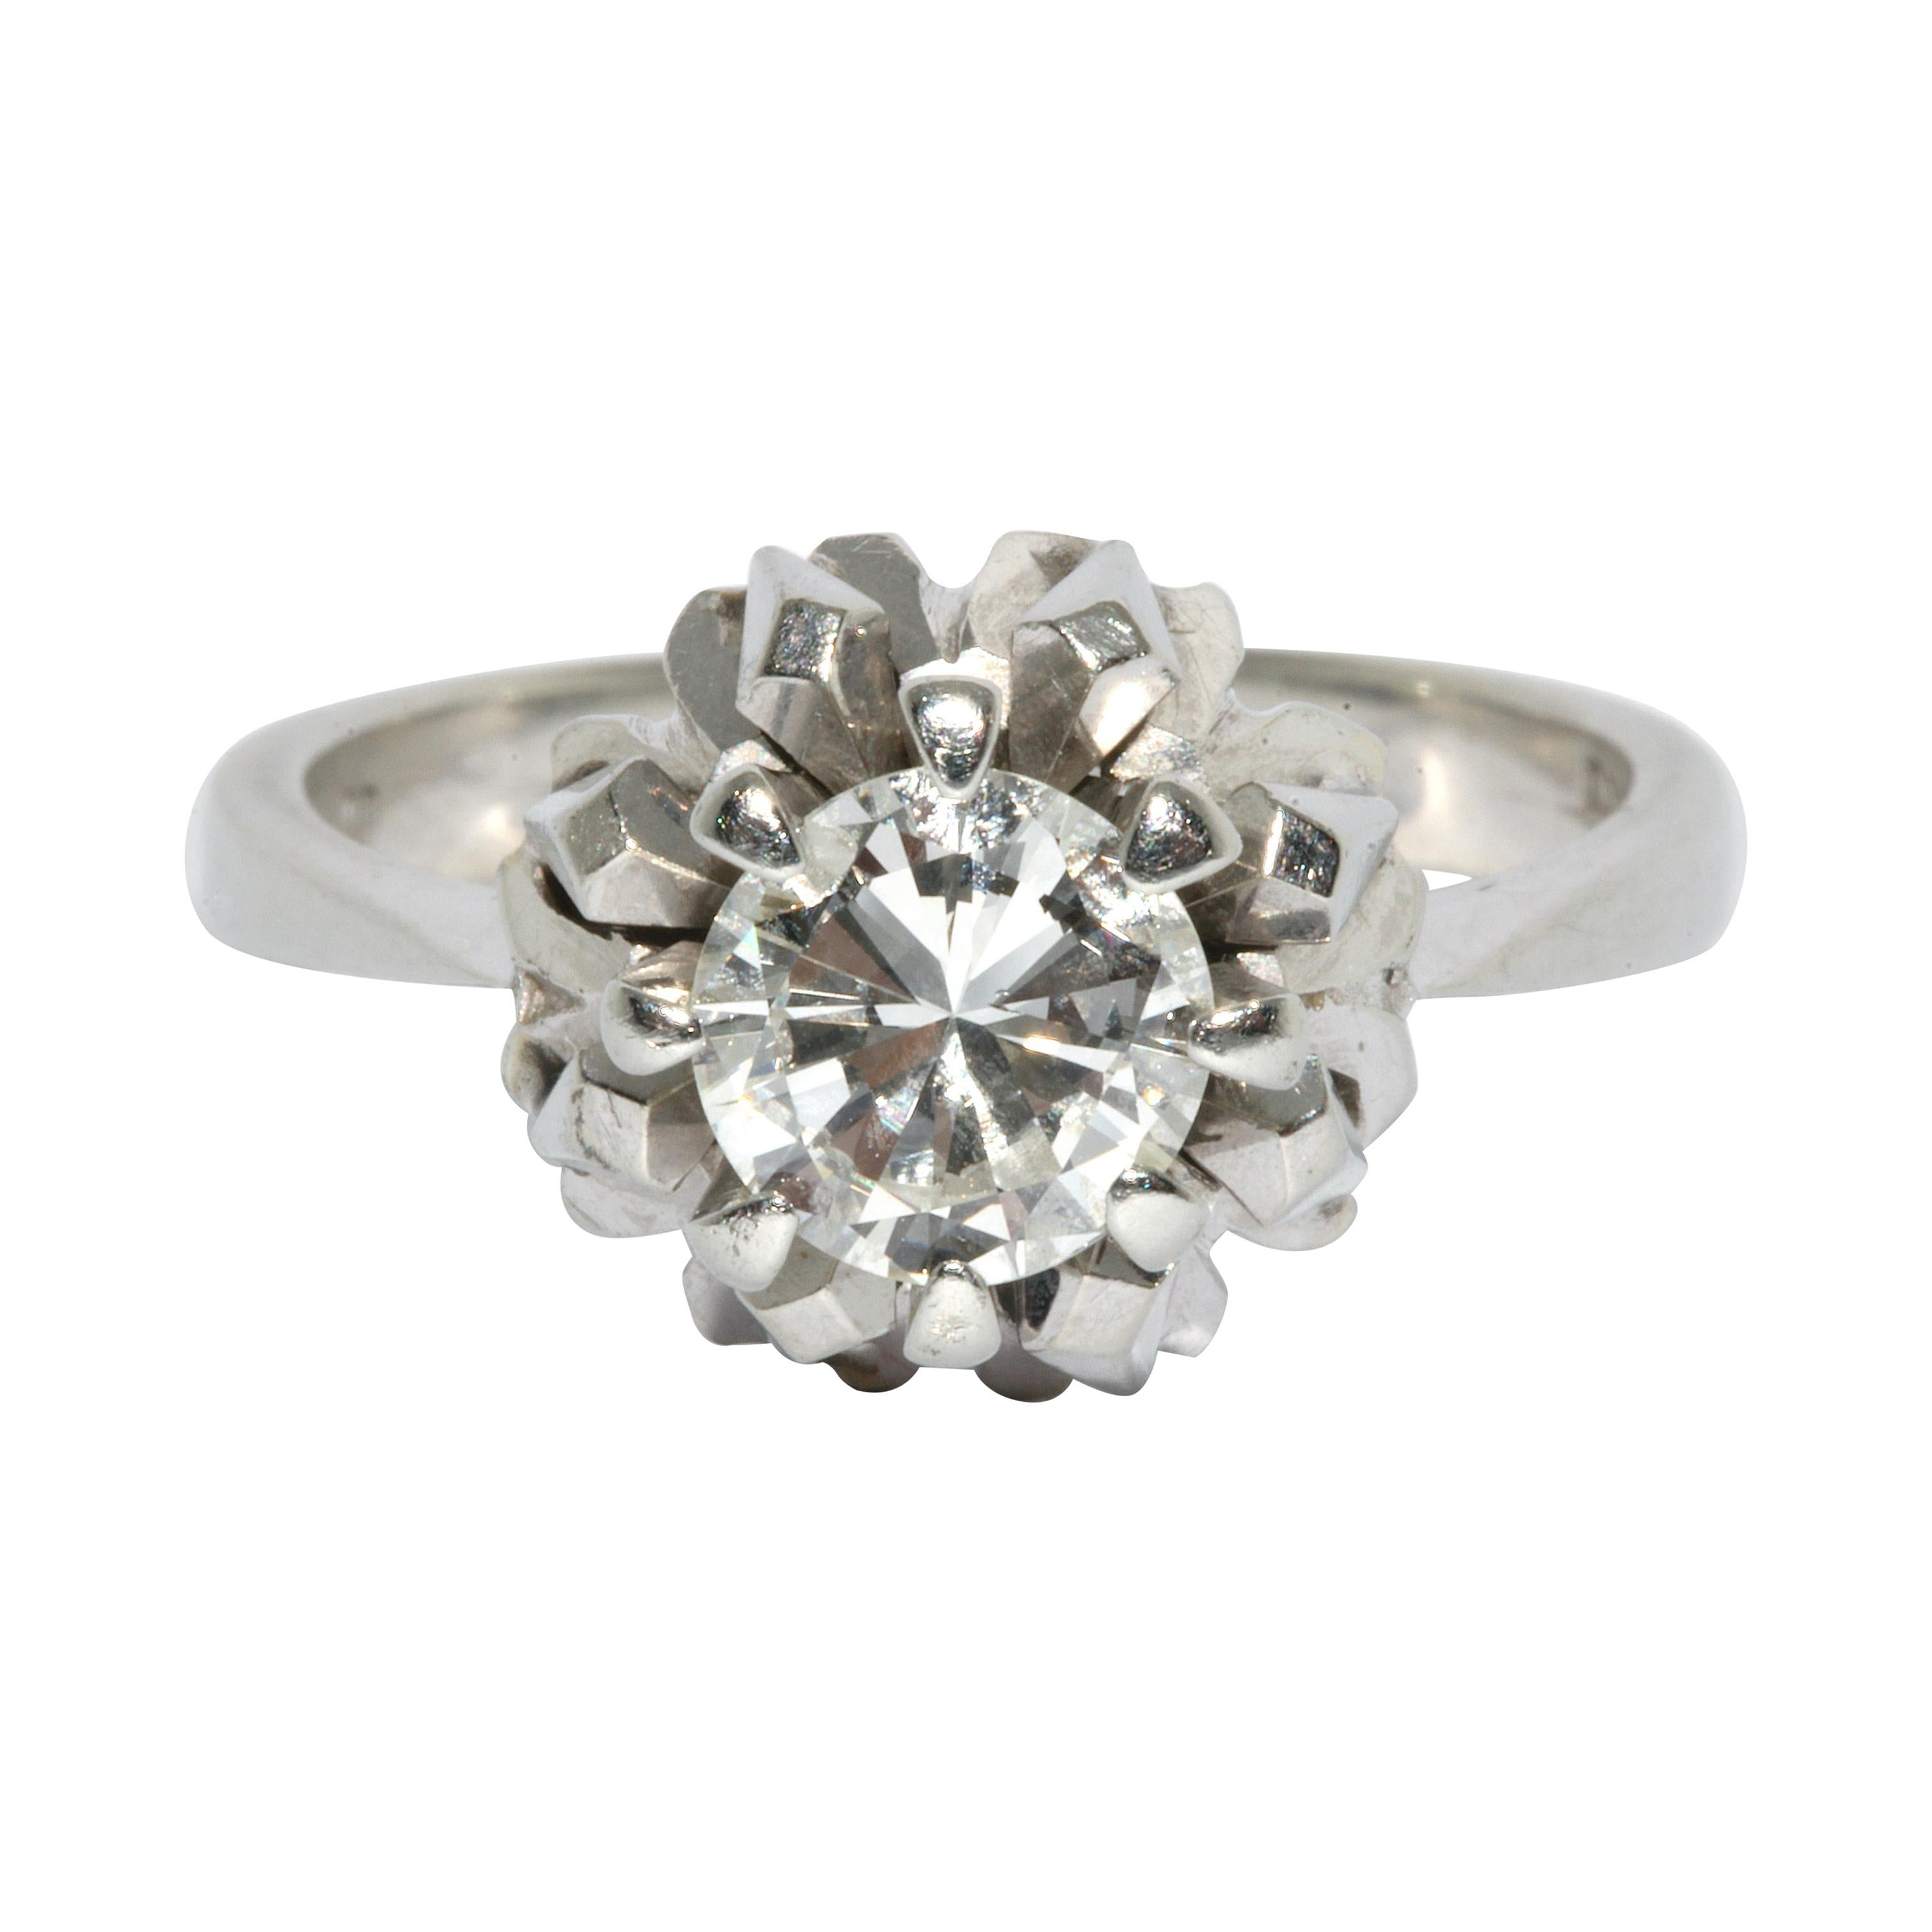 18 Karat White Gold Ring Set with 1.11 Carat White Solitaire Diamond For Sale